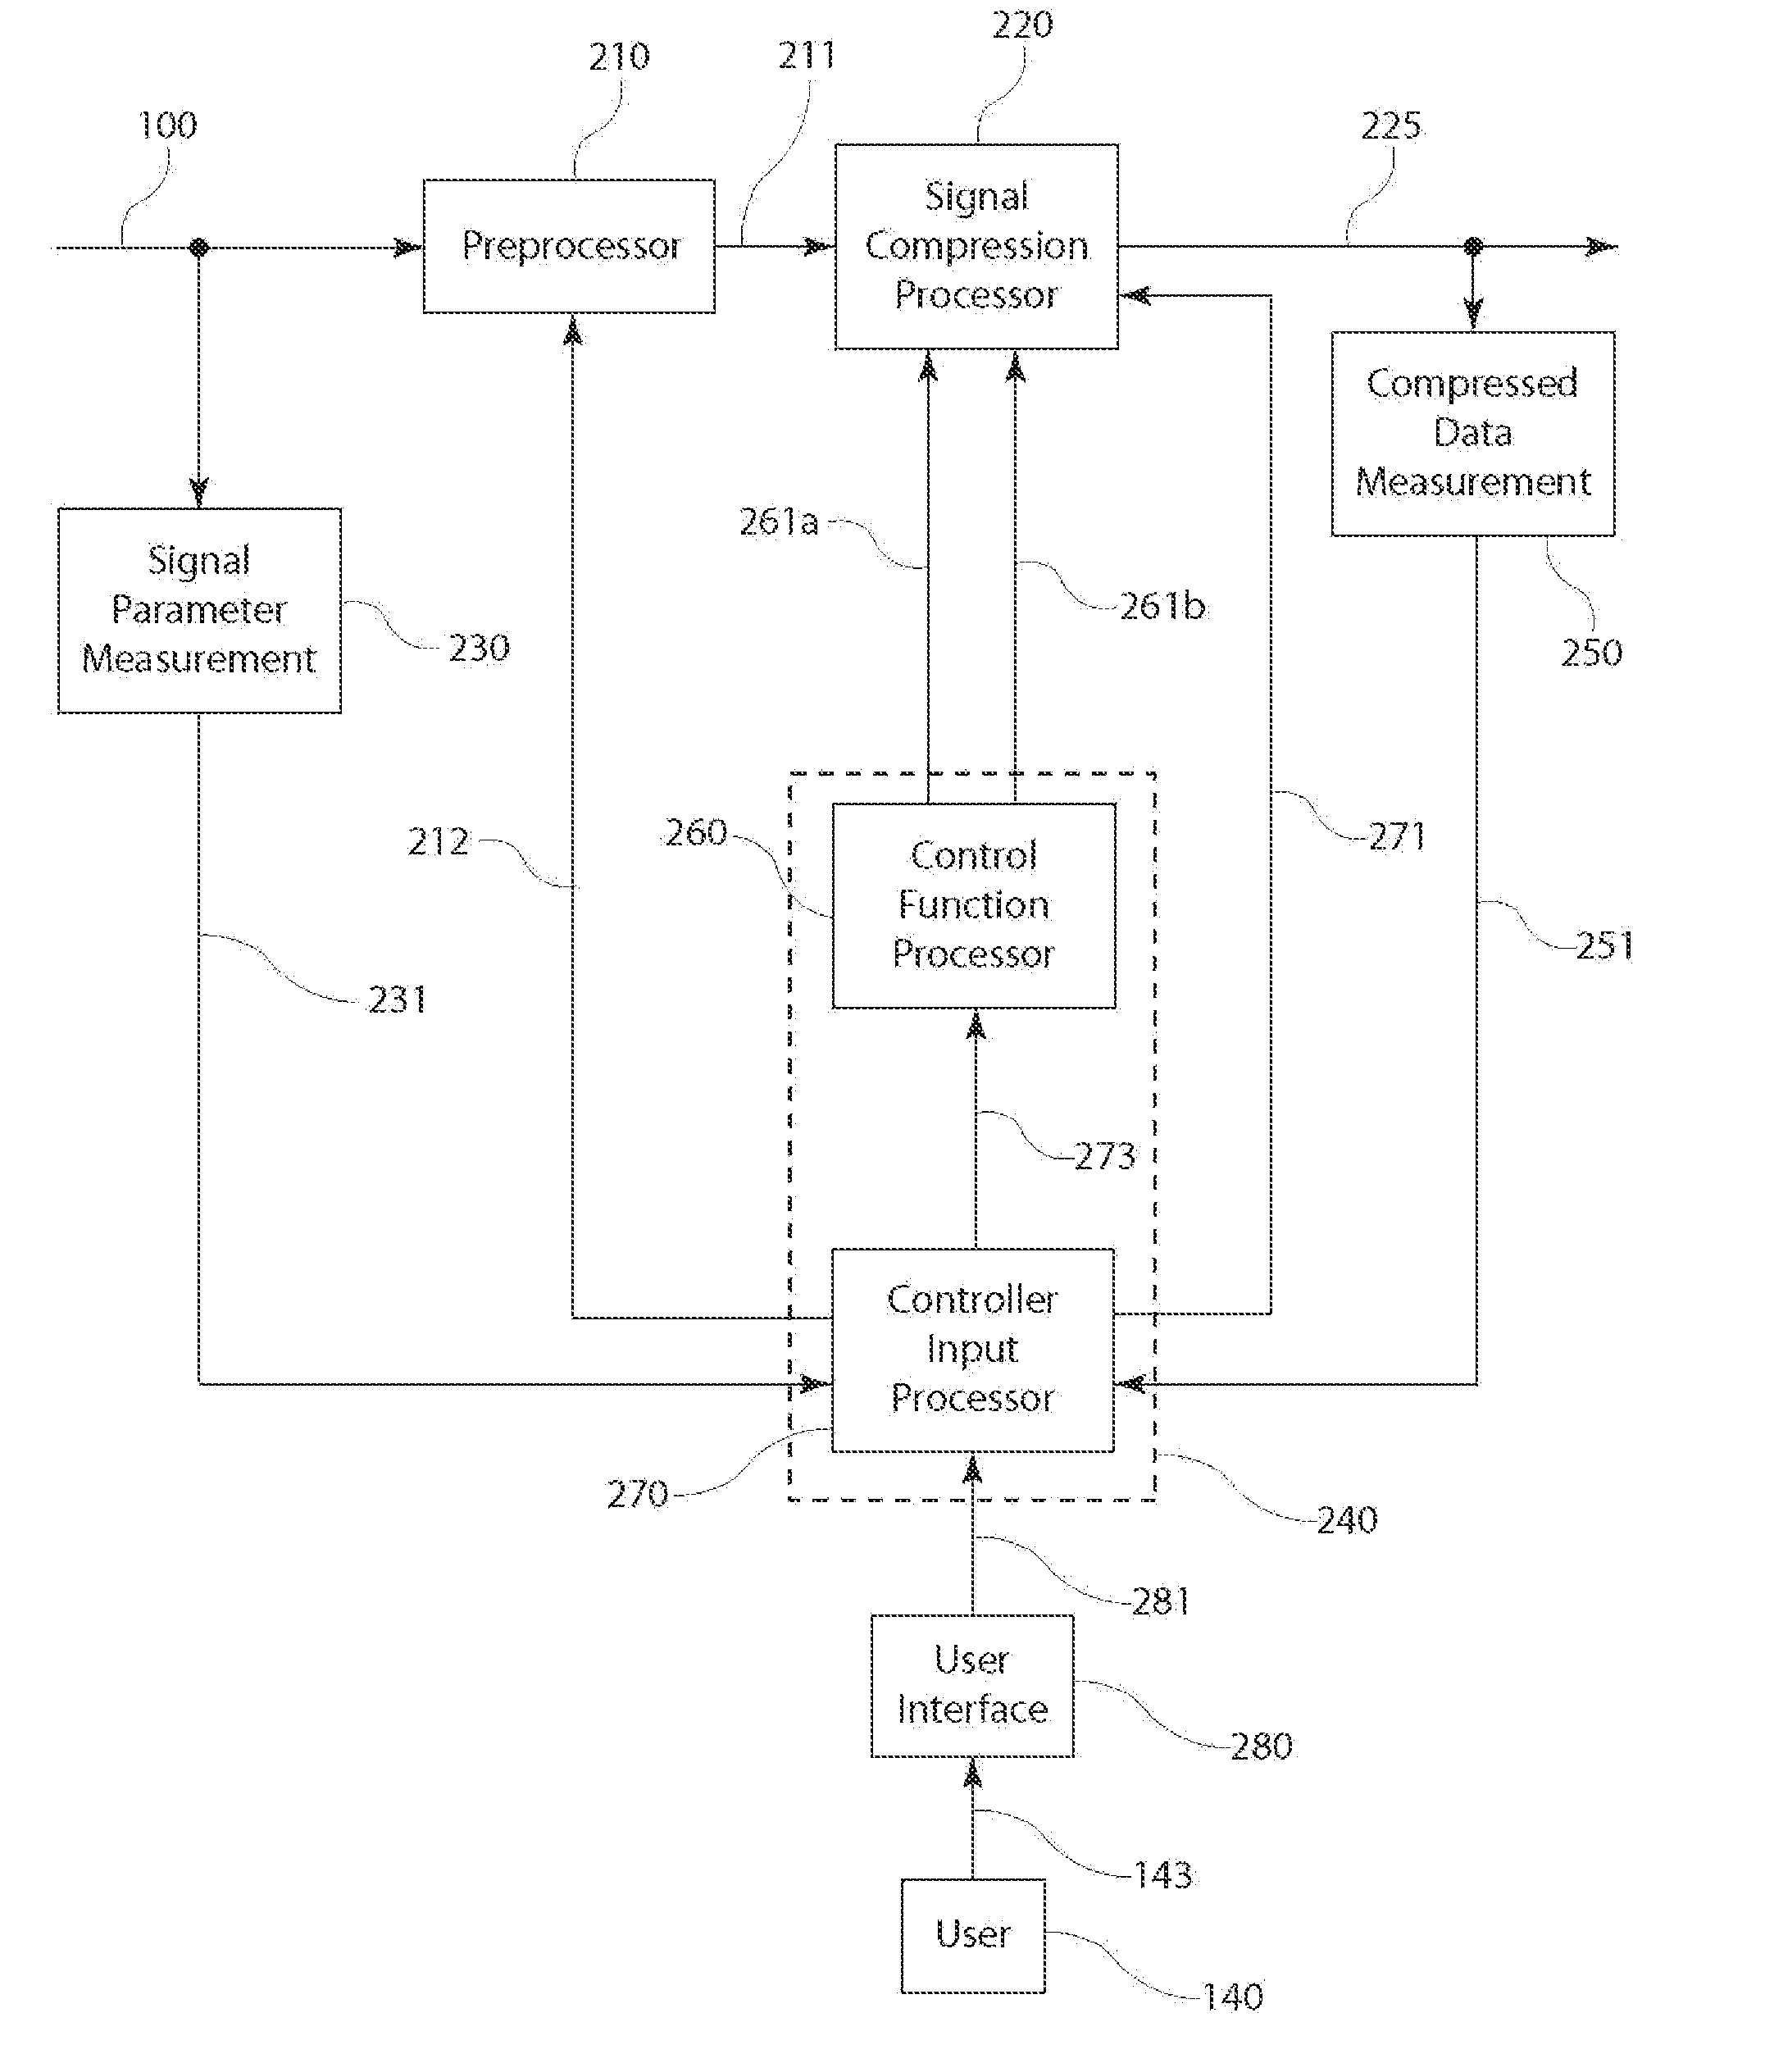 Enhanced control for compression and decompression of sampled signals